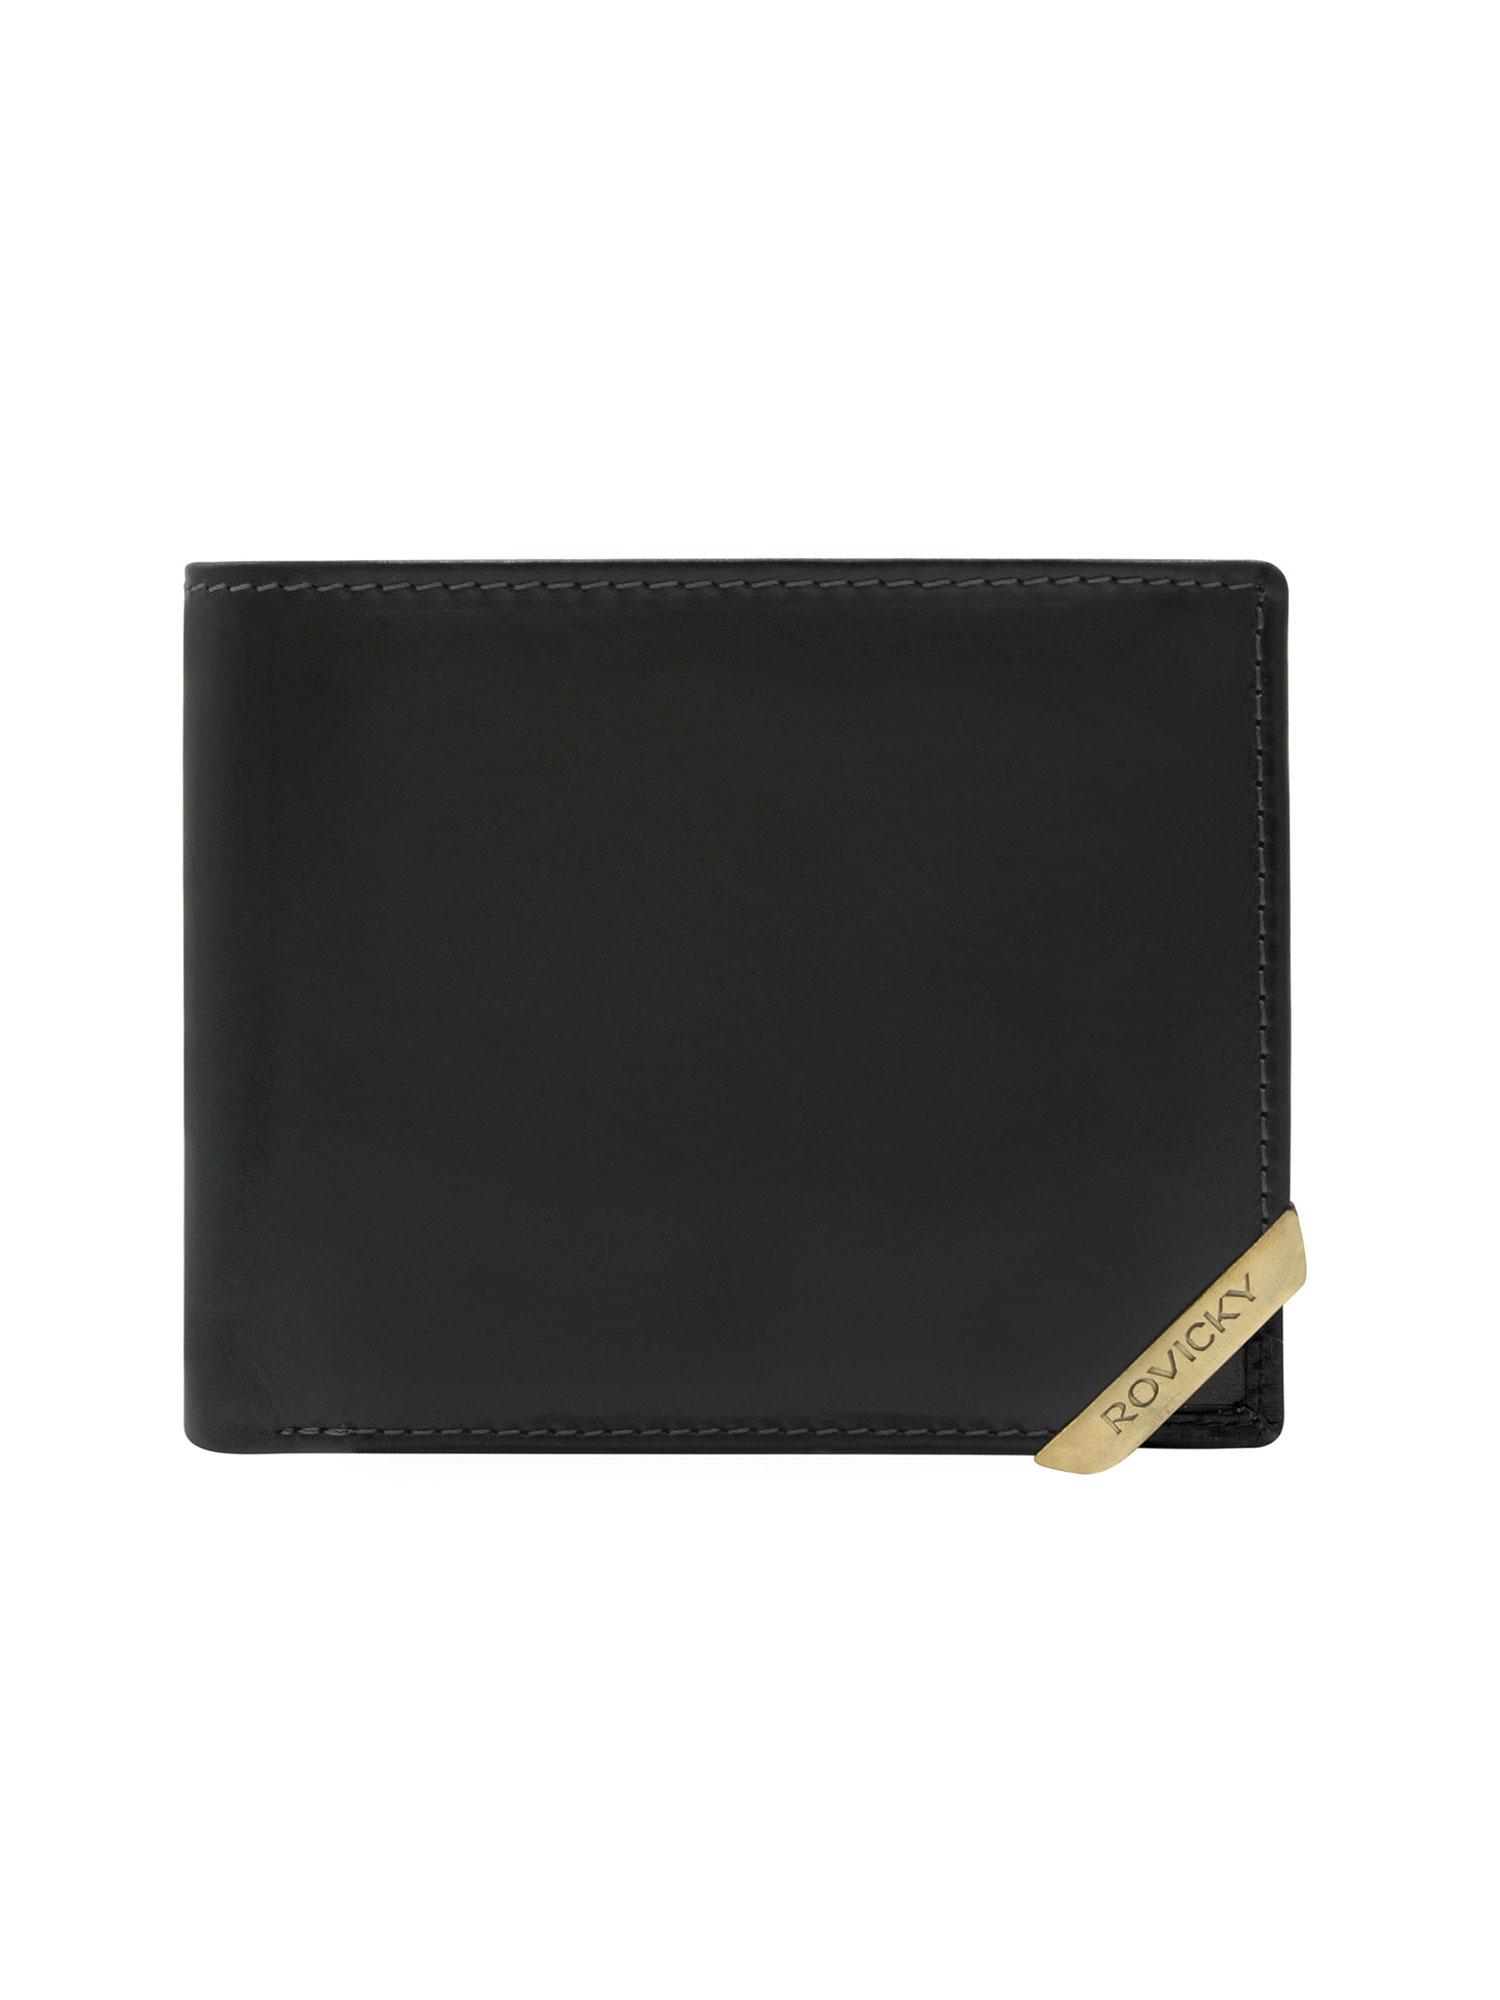 Black and dark brown horizontal men's wallet with accent